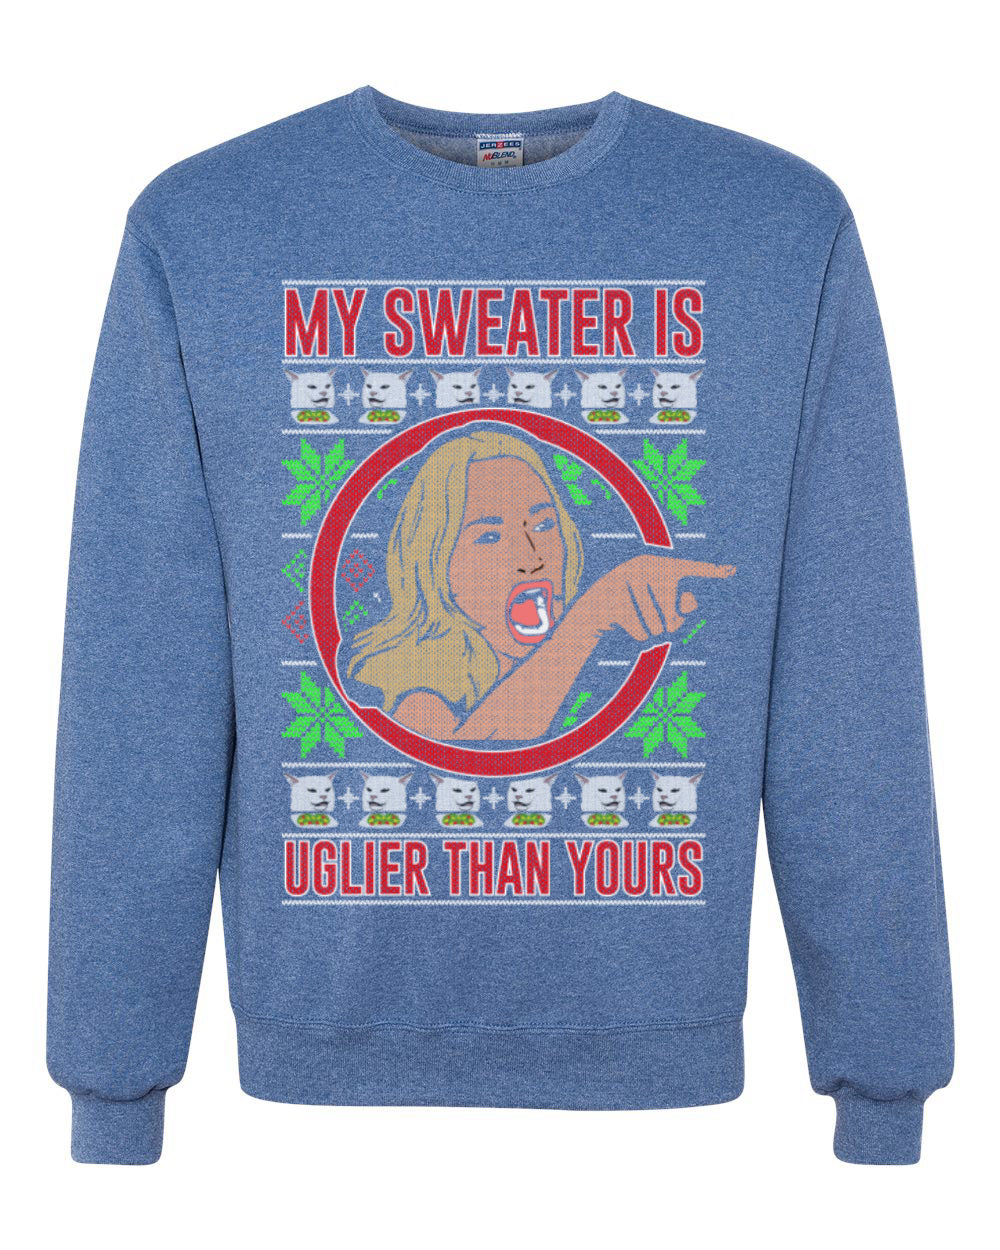 My Sweater Is Uglier Than Yours Woman Pointing Cat Meme Ugly Christmas Sweater Unisex Crewneck Graphic Sweatshirt